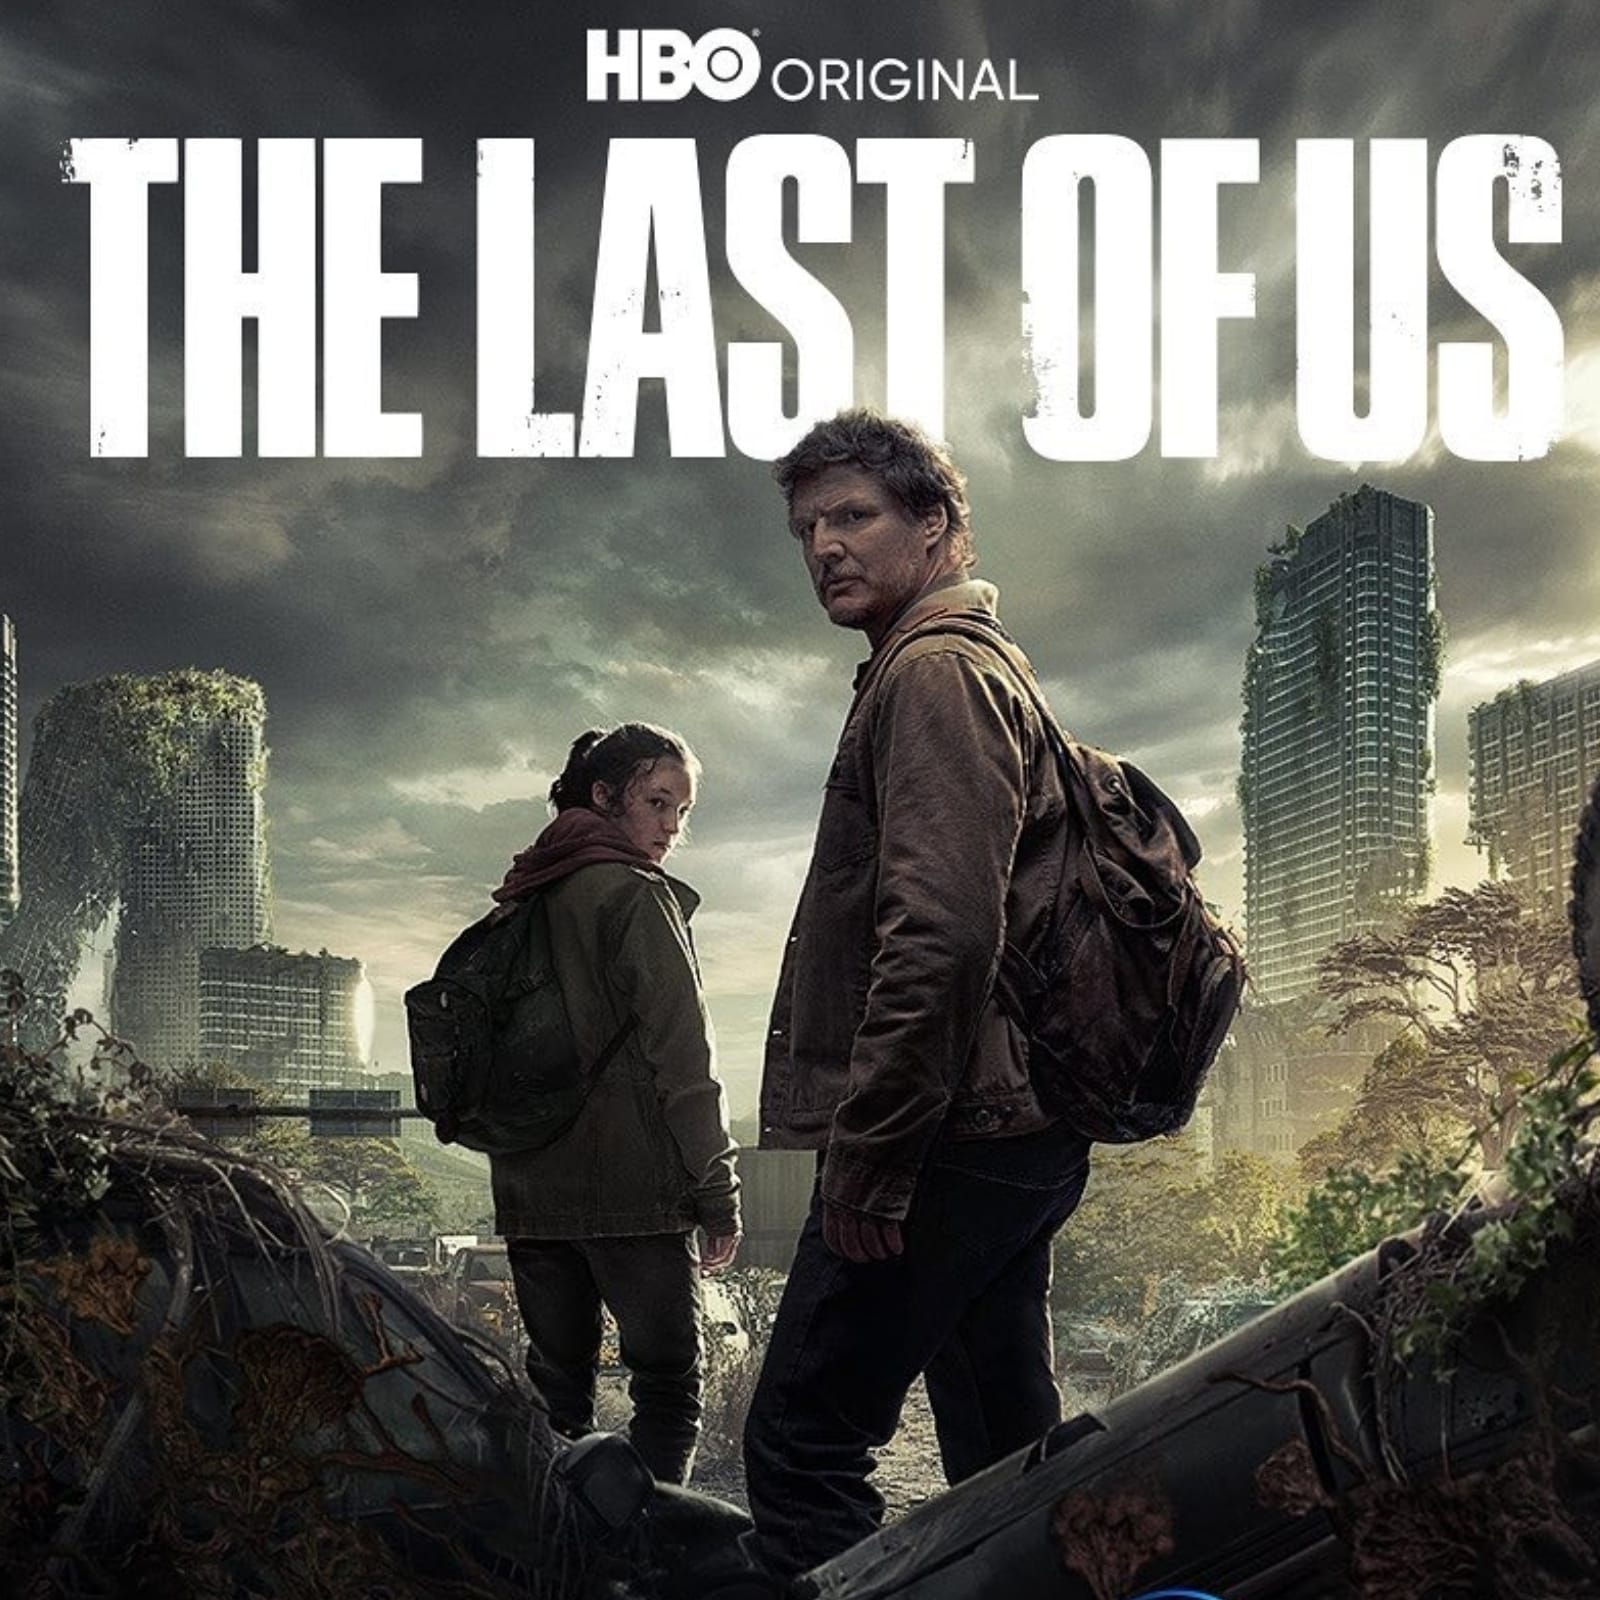 Action Adventure Game The Last Of Us Is Now An HBO Original Drama Series, Streaming Now